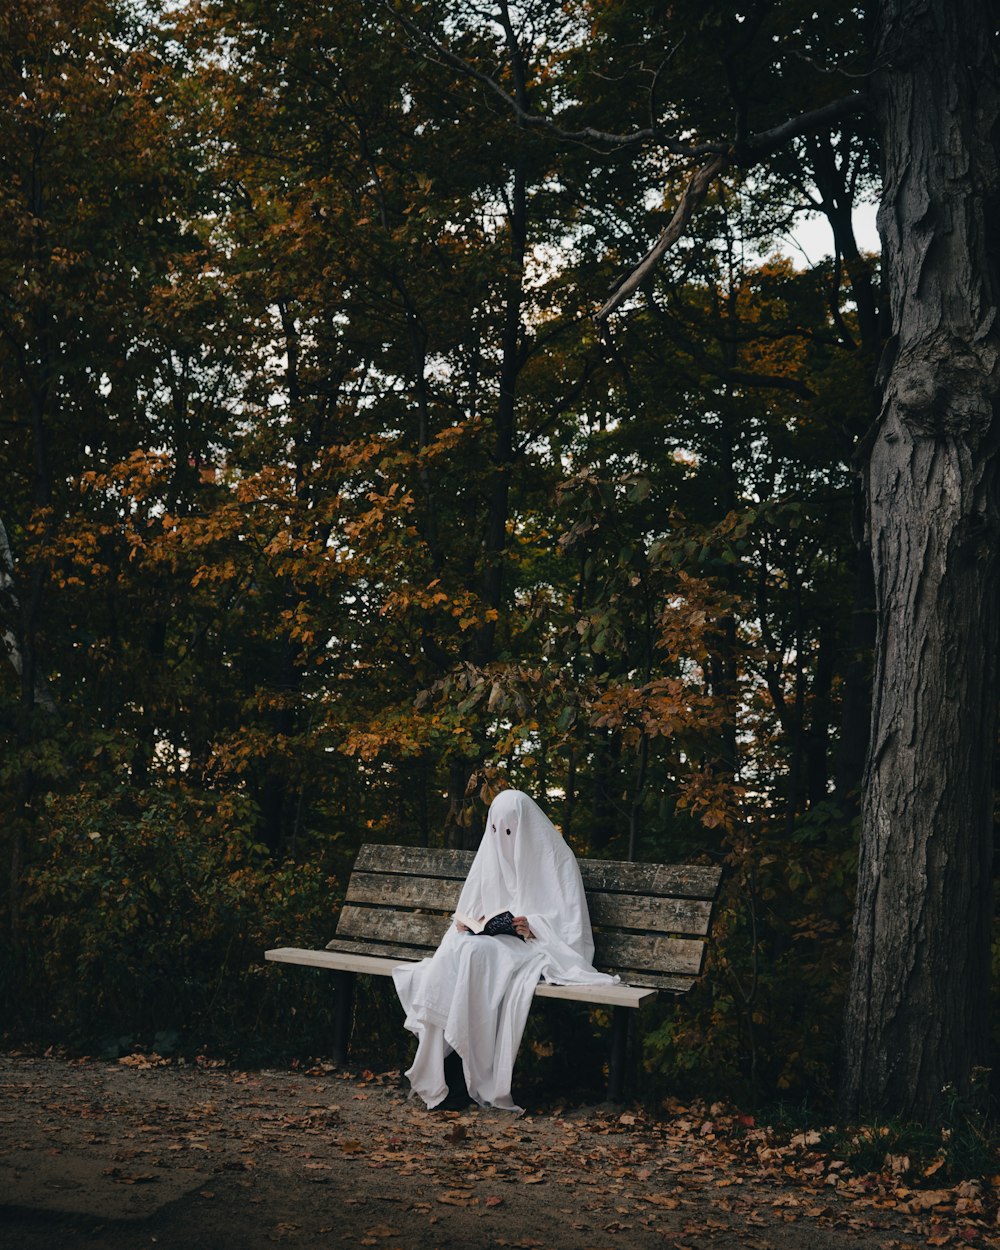 a person in a white dress sitting on a bench in a park